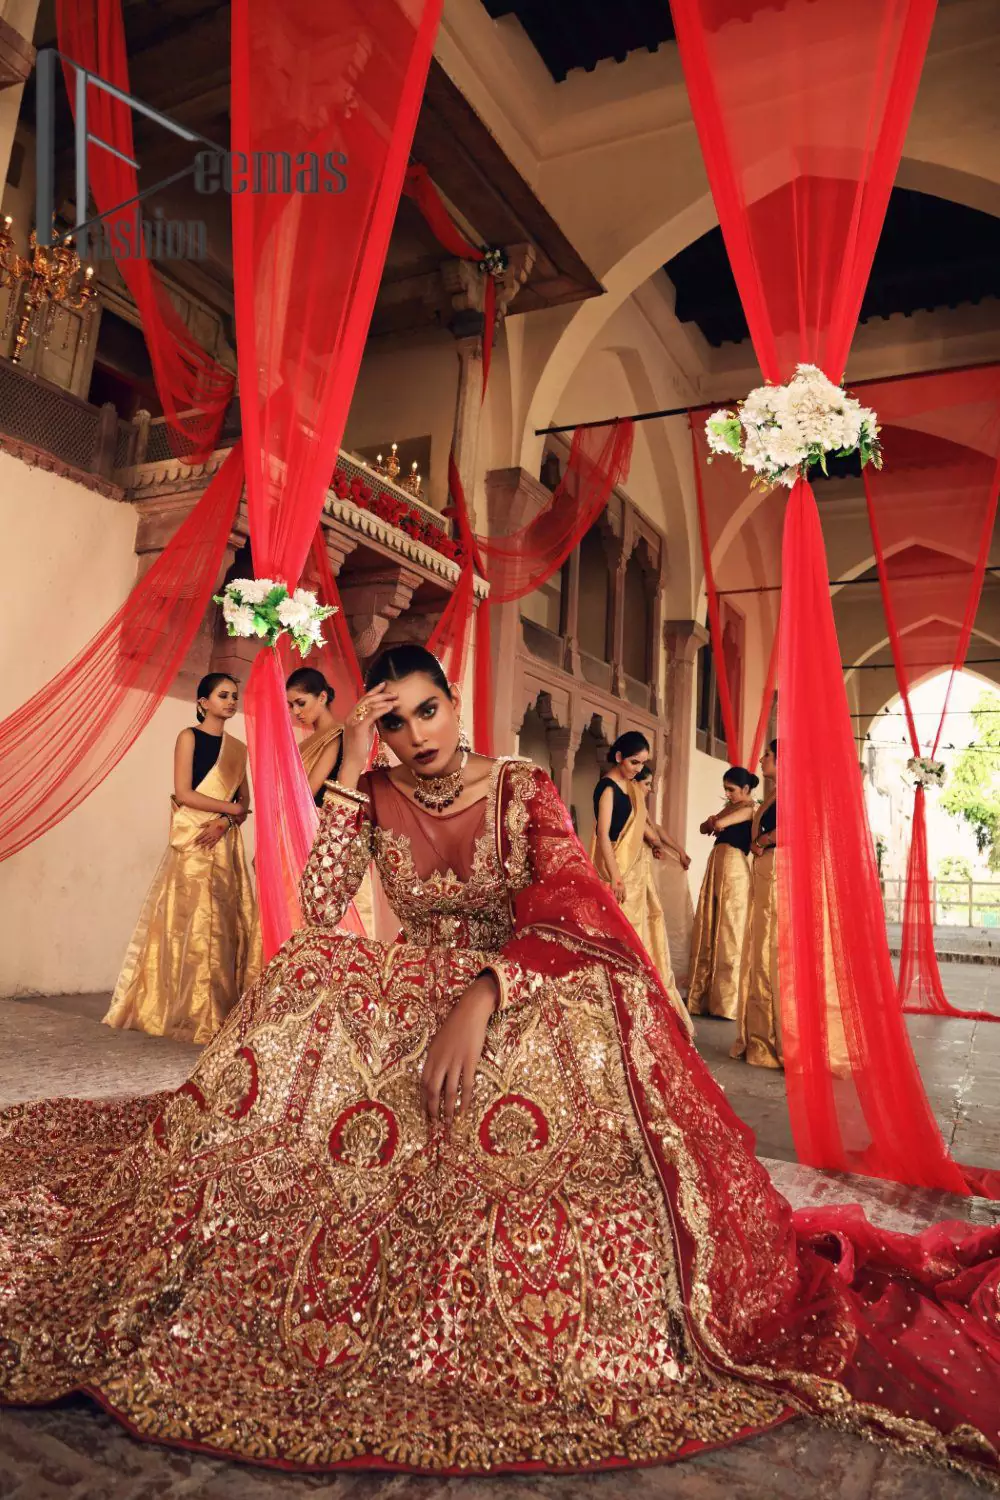 Celebrate the most romantic moments of your Big Day in the style of DeemasFashion. The red blouse represents the love in the air with handsomely embellished golden embroidery which includes kora, dabka, tilla and zardozi. It is prominent with an illusion neck and combine with full sleeves to enhance the love of you for your lovely audience. It is coordinated with a lehenga which is heavily adorned with the finest embroidery and looks super splendid as well. Complete this lovely article with the same colour dupatta that is adorned with a four-sided border and sequins sprayed all over to give you the romantic look.